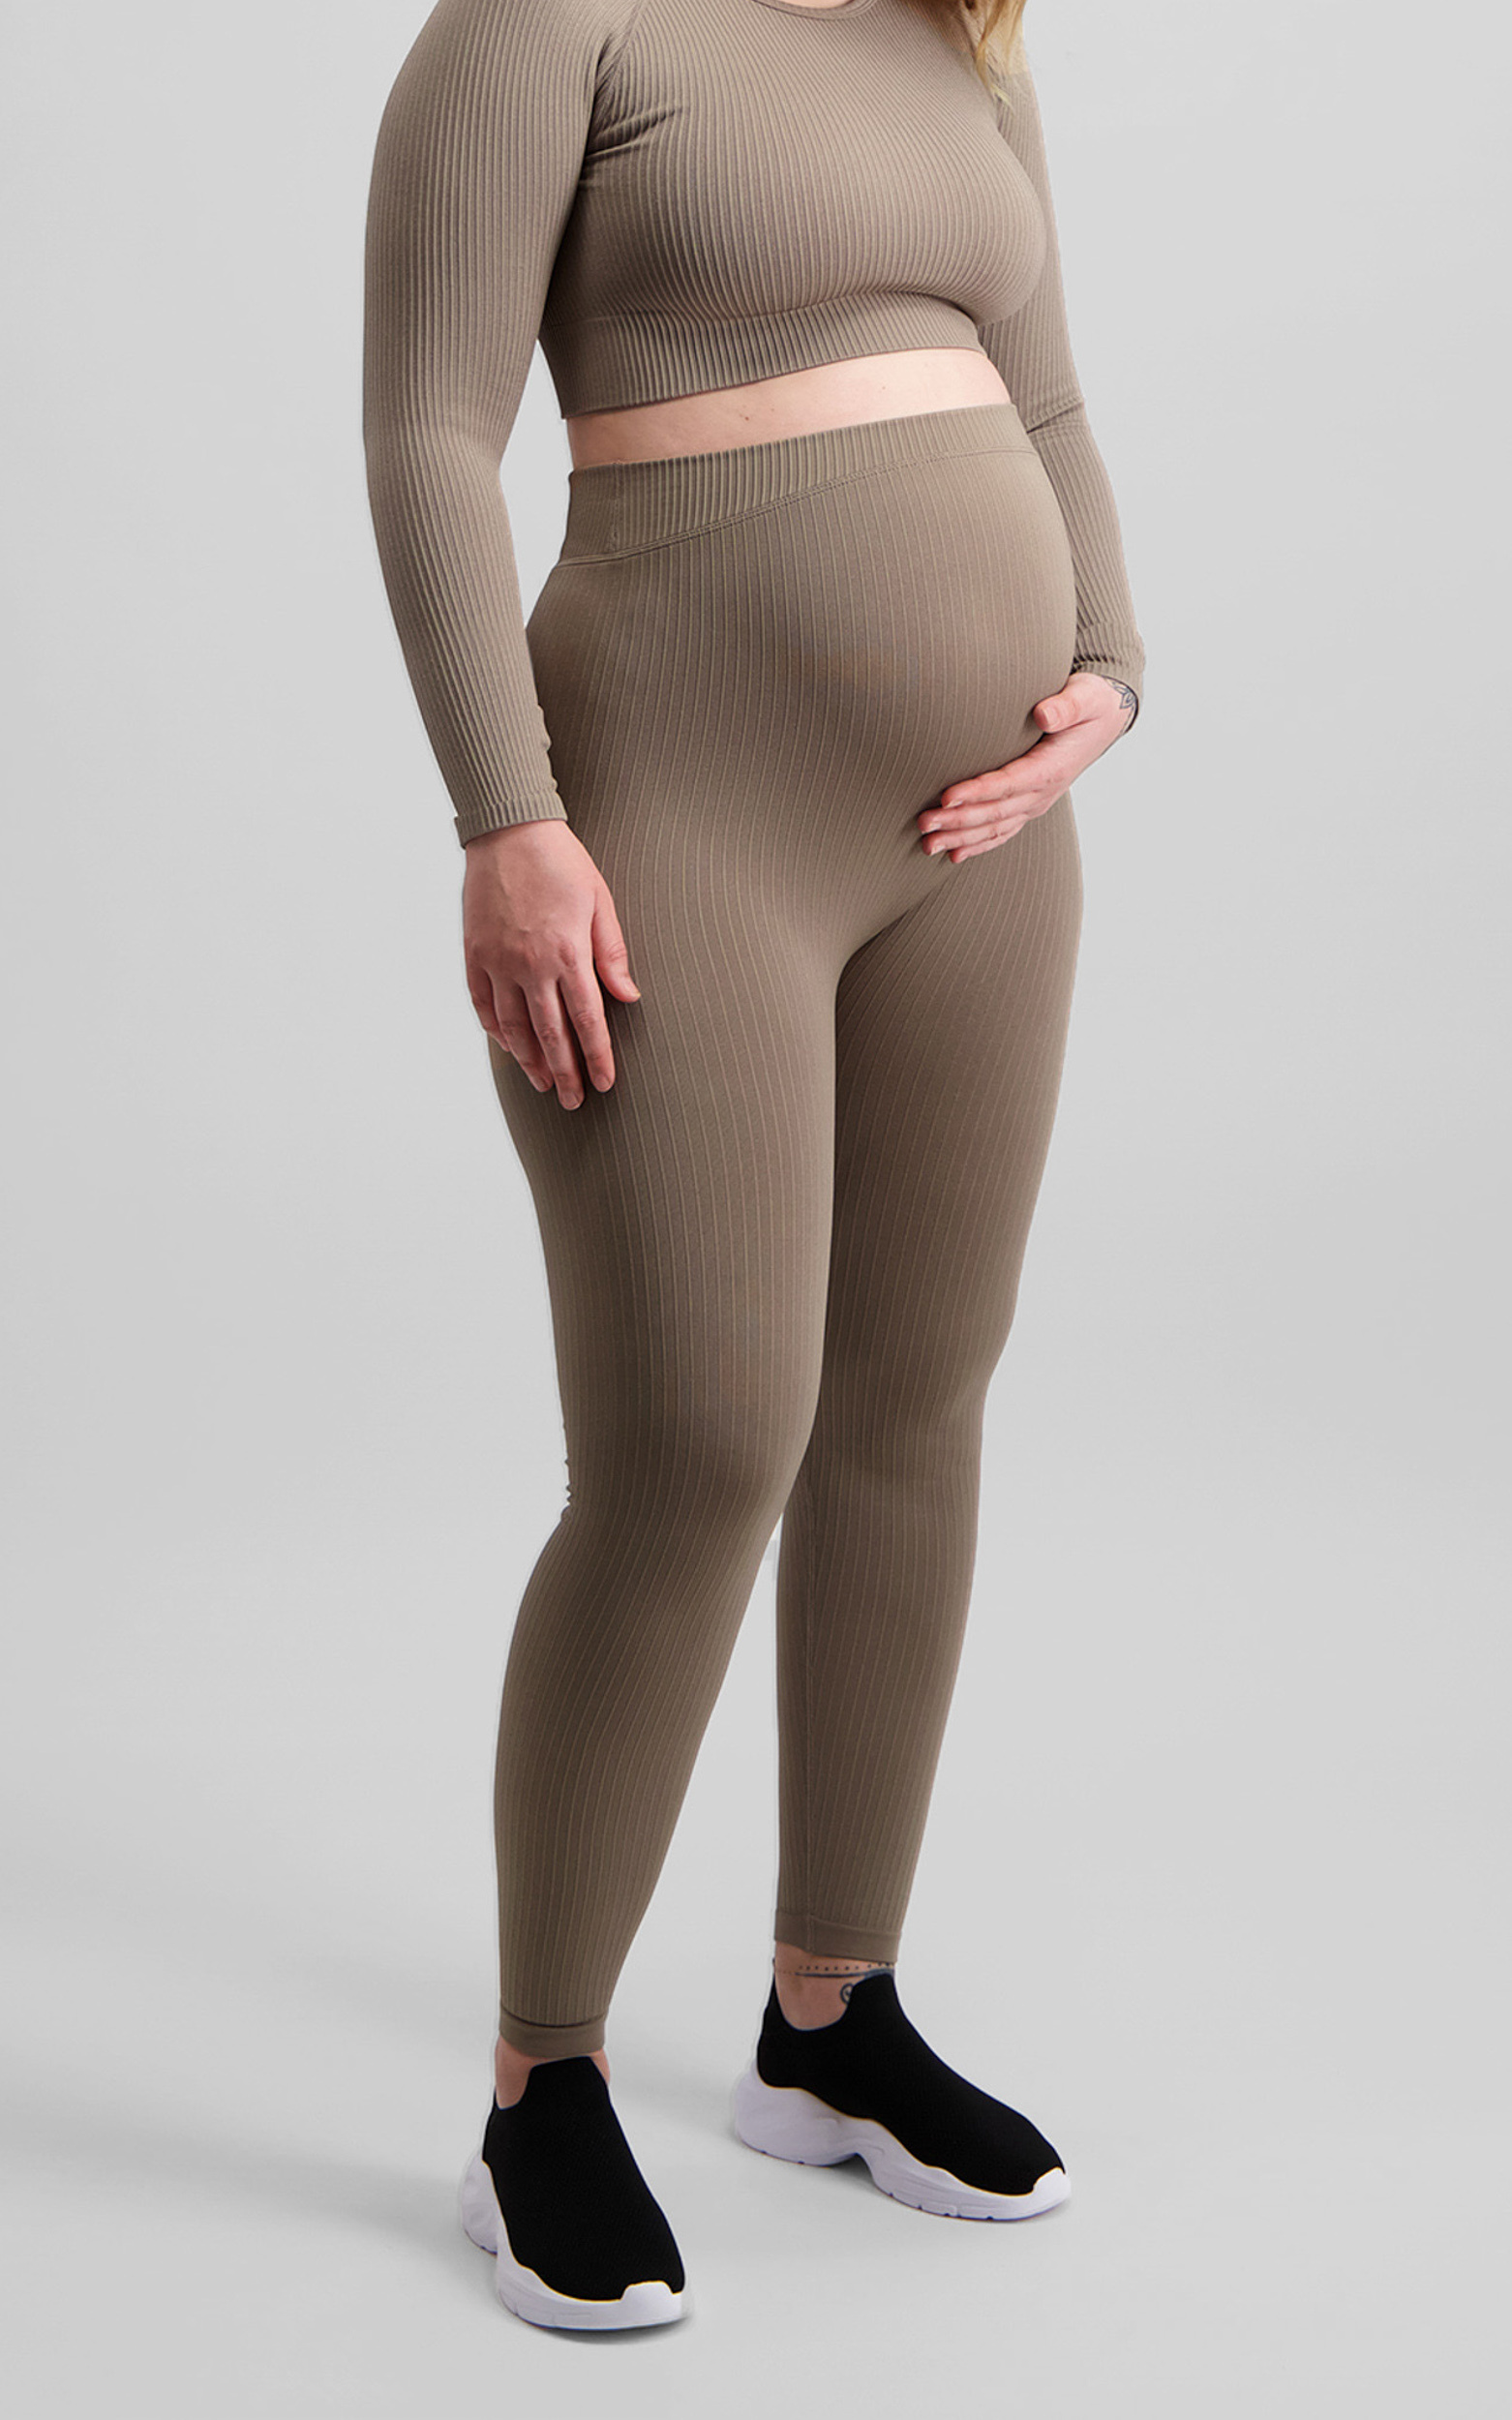 Aim'n - MATERNITY RIBBED SEAMLESS TIGHTS in Espresso - XS, BRN1, hi-res image number null